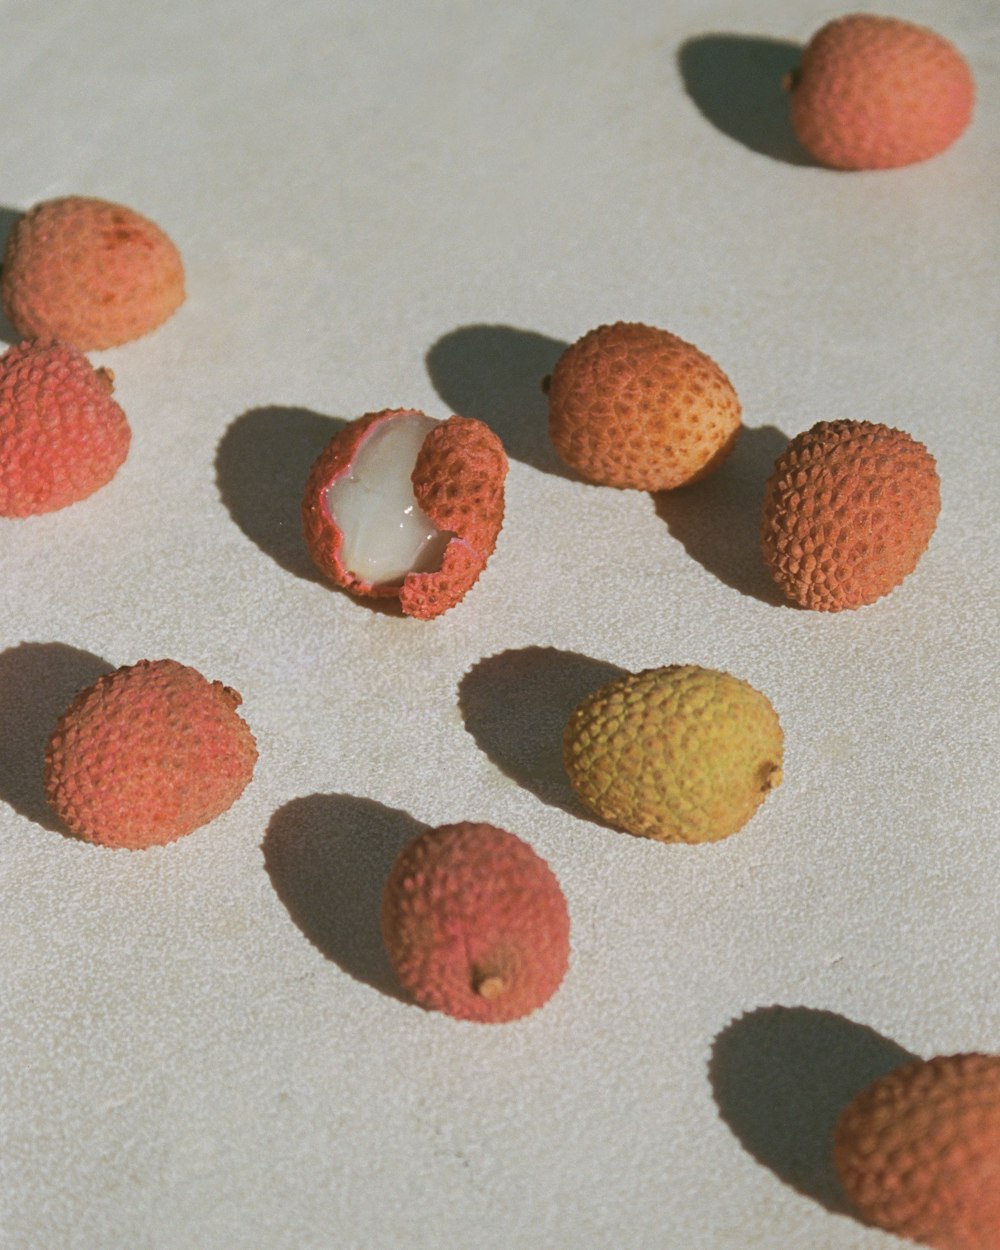 a group of fruit sitting on top of a white surface